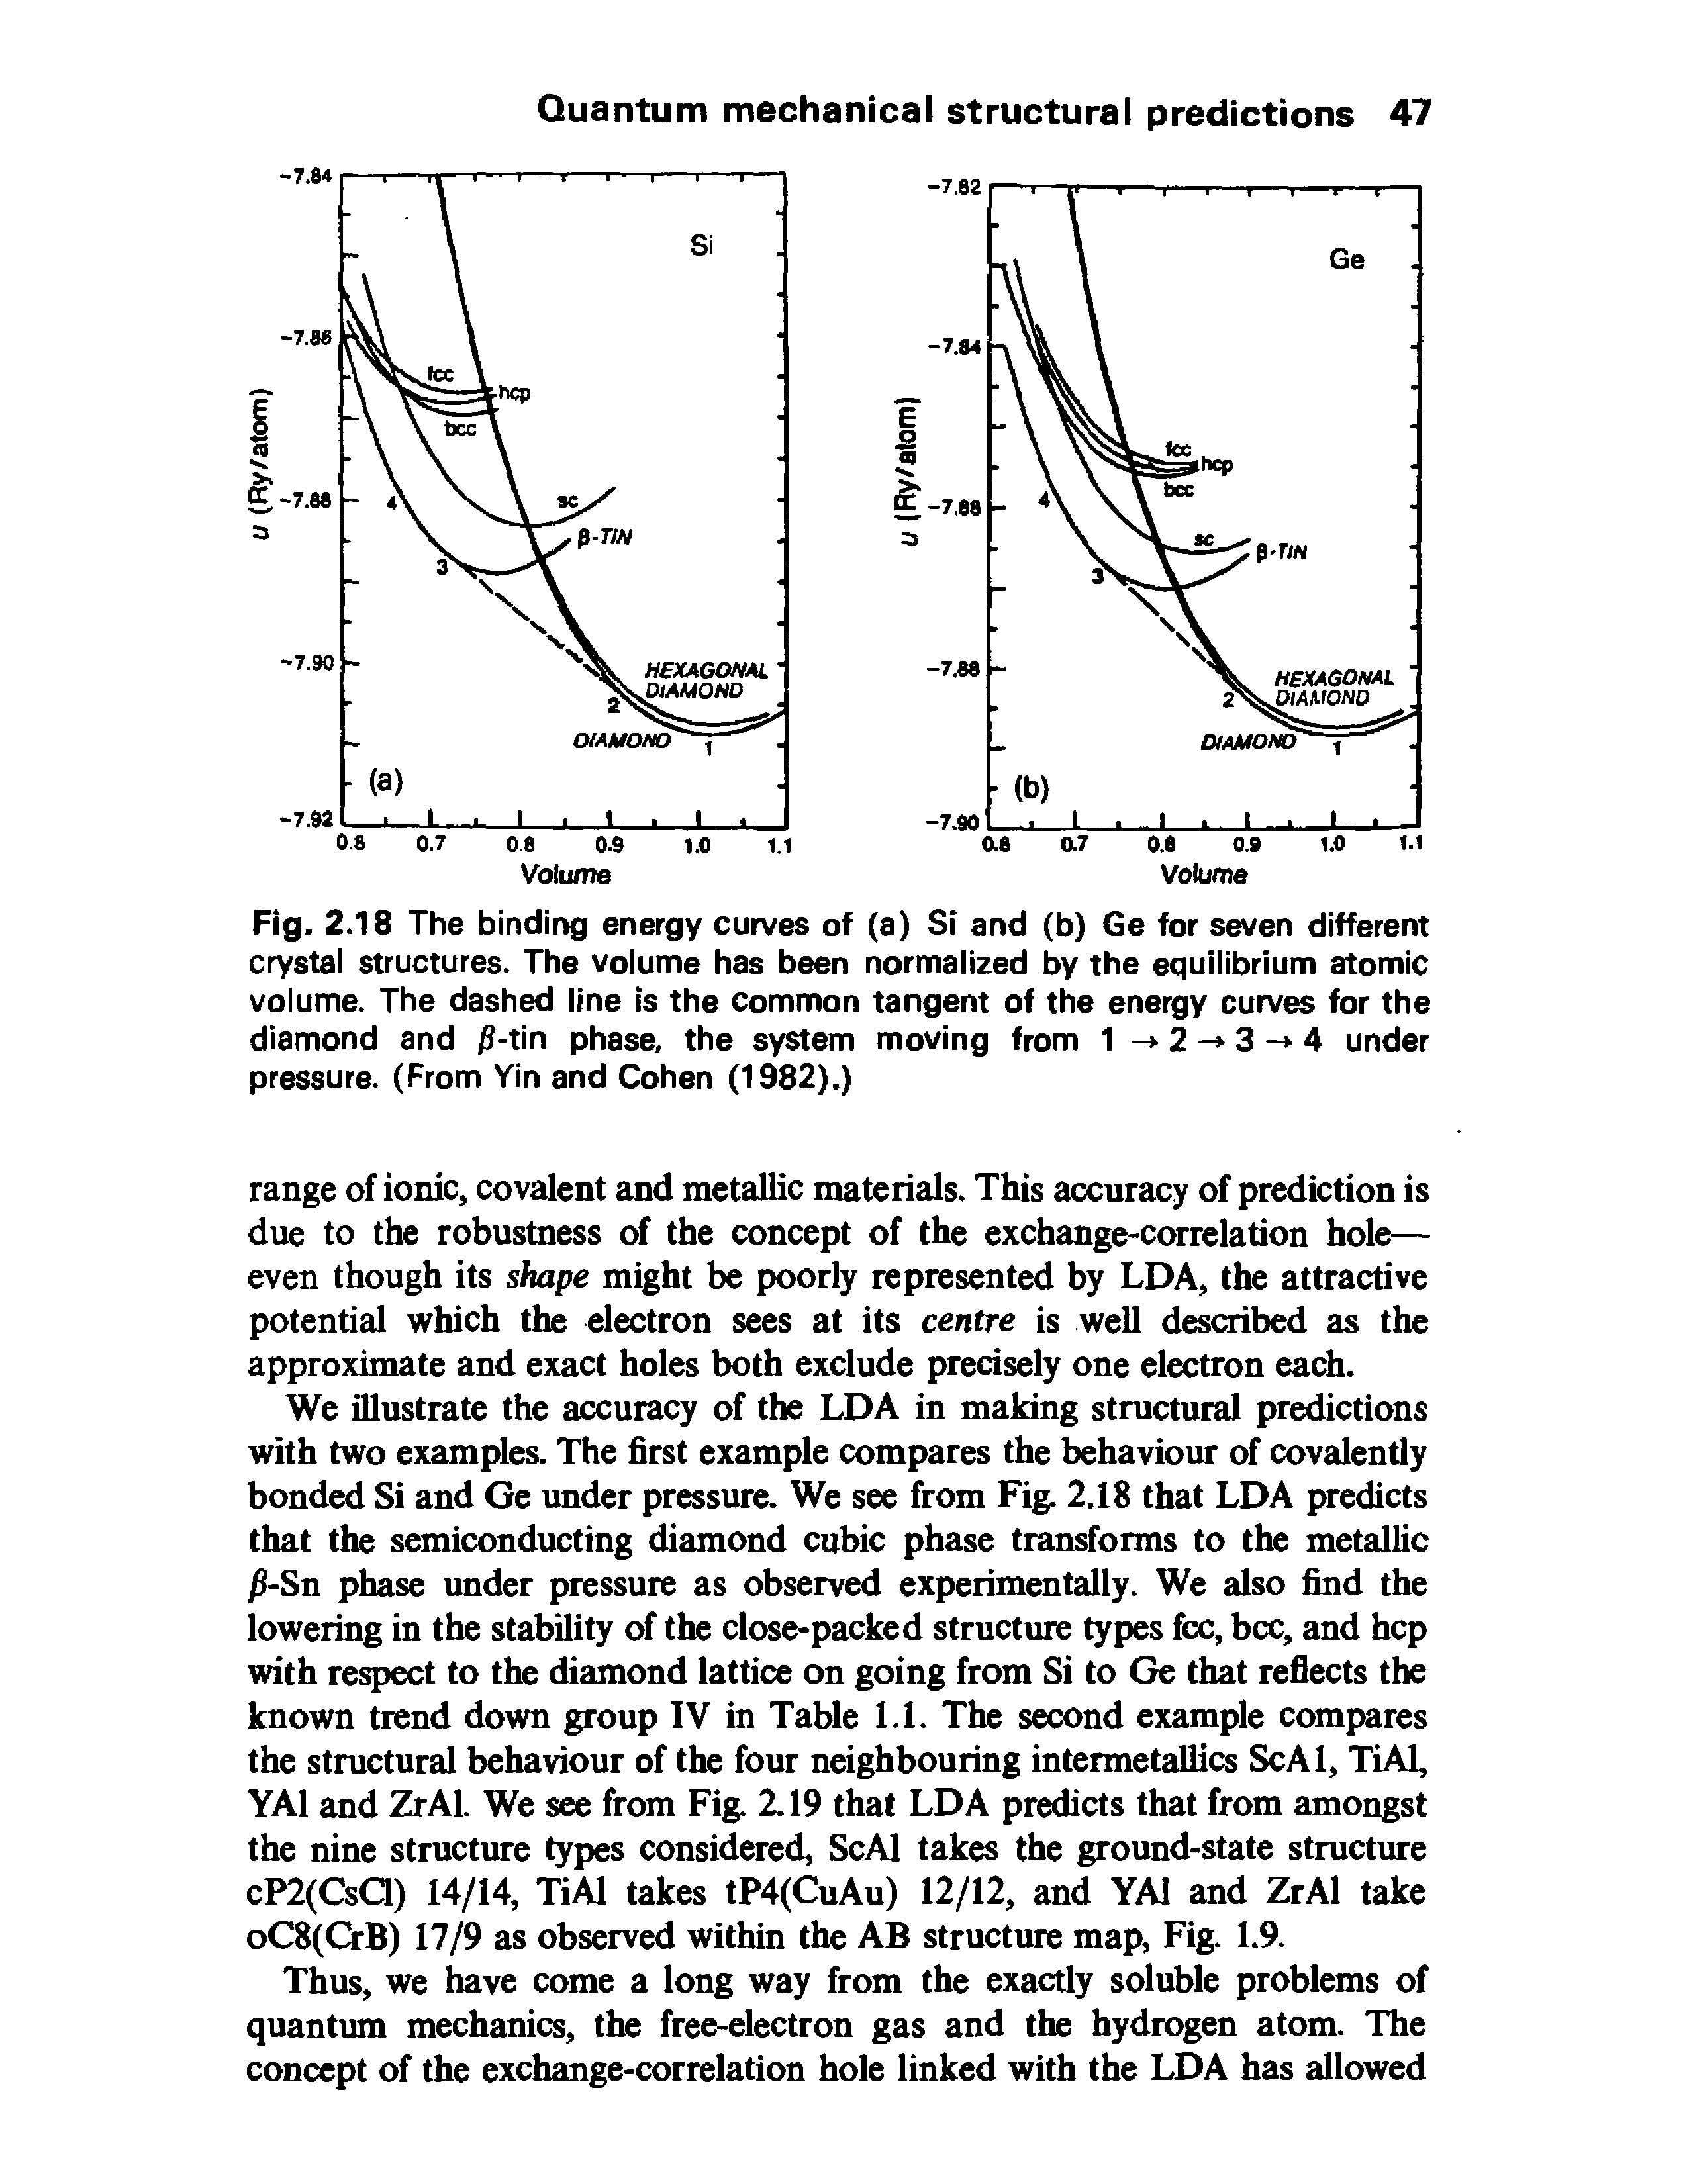 Fig. 2.18 The binding energy curves of (a) Si and (b) Ge for seven different crystal structures. The volume has been normalized by the equilibrium atomic volume. The dashed line is the common tangent of the energy curves for the diamond and / -tin phase, the system moving from 1 2 - 3 - 4 under...